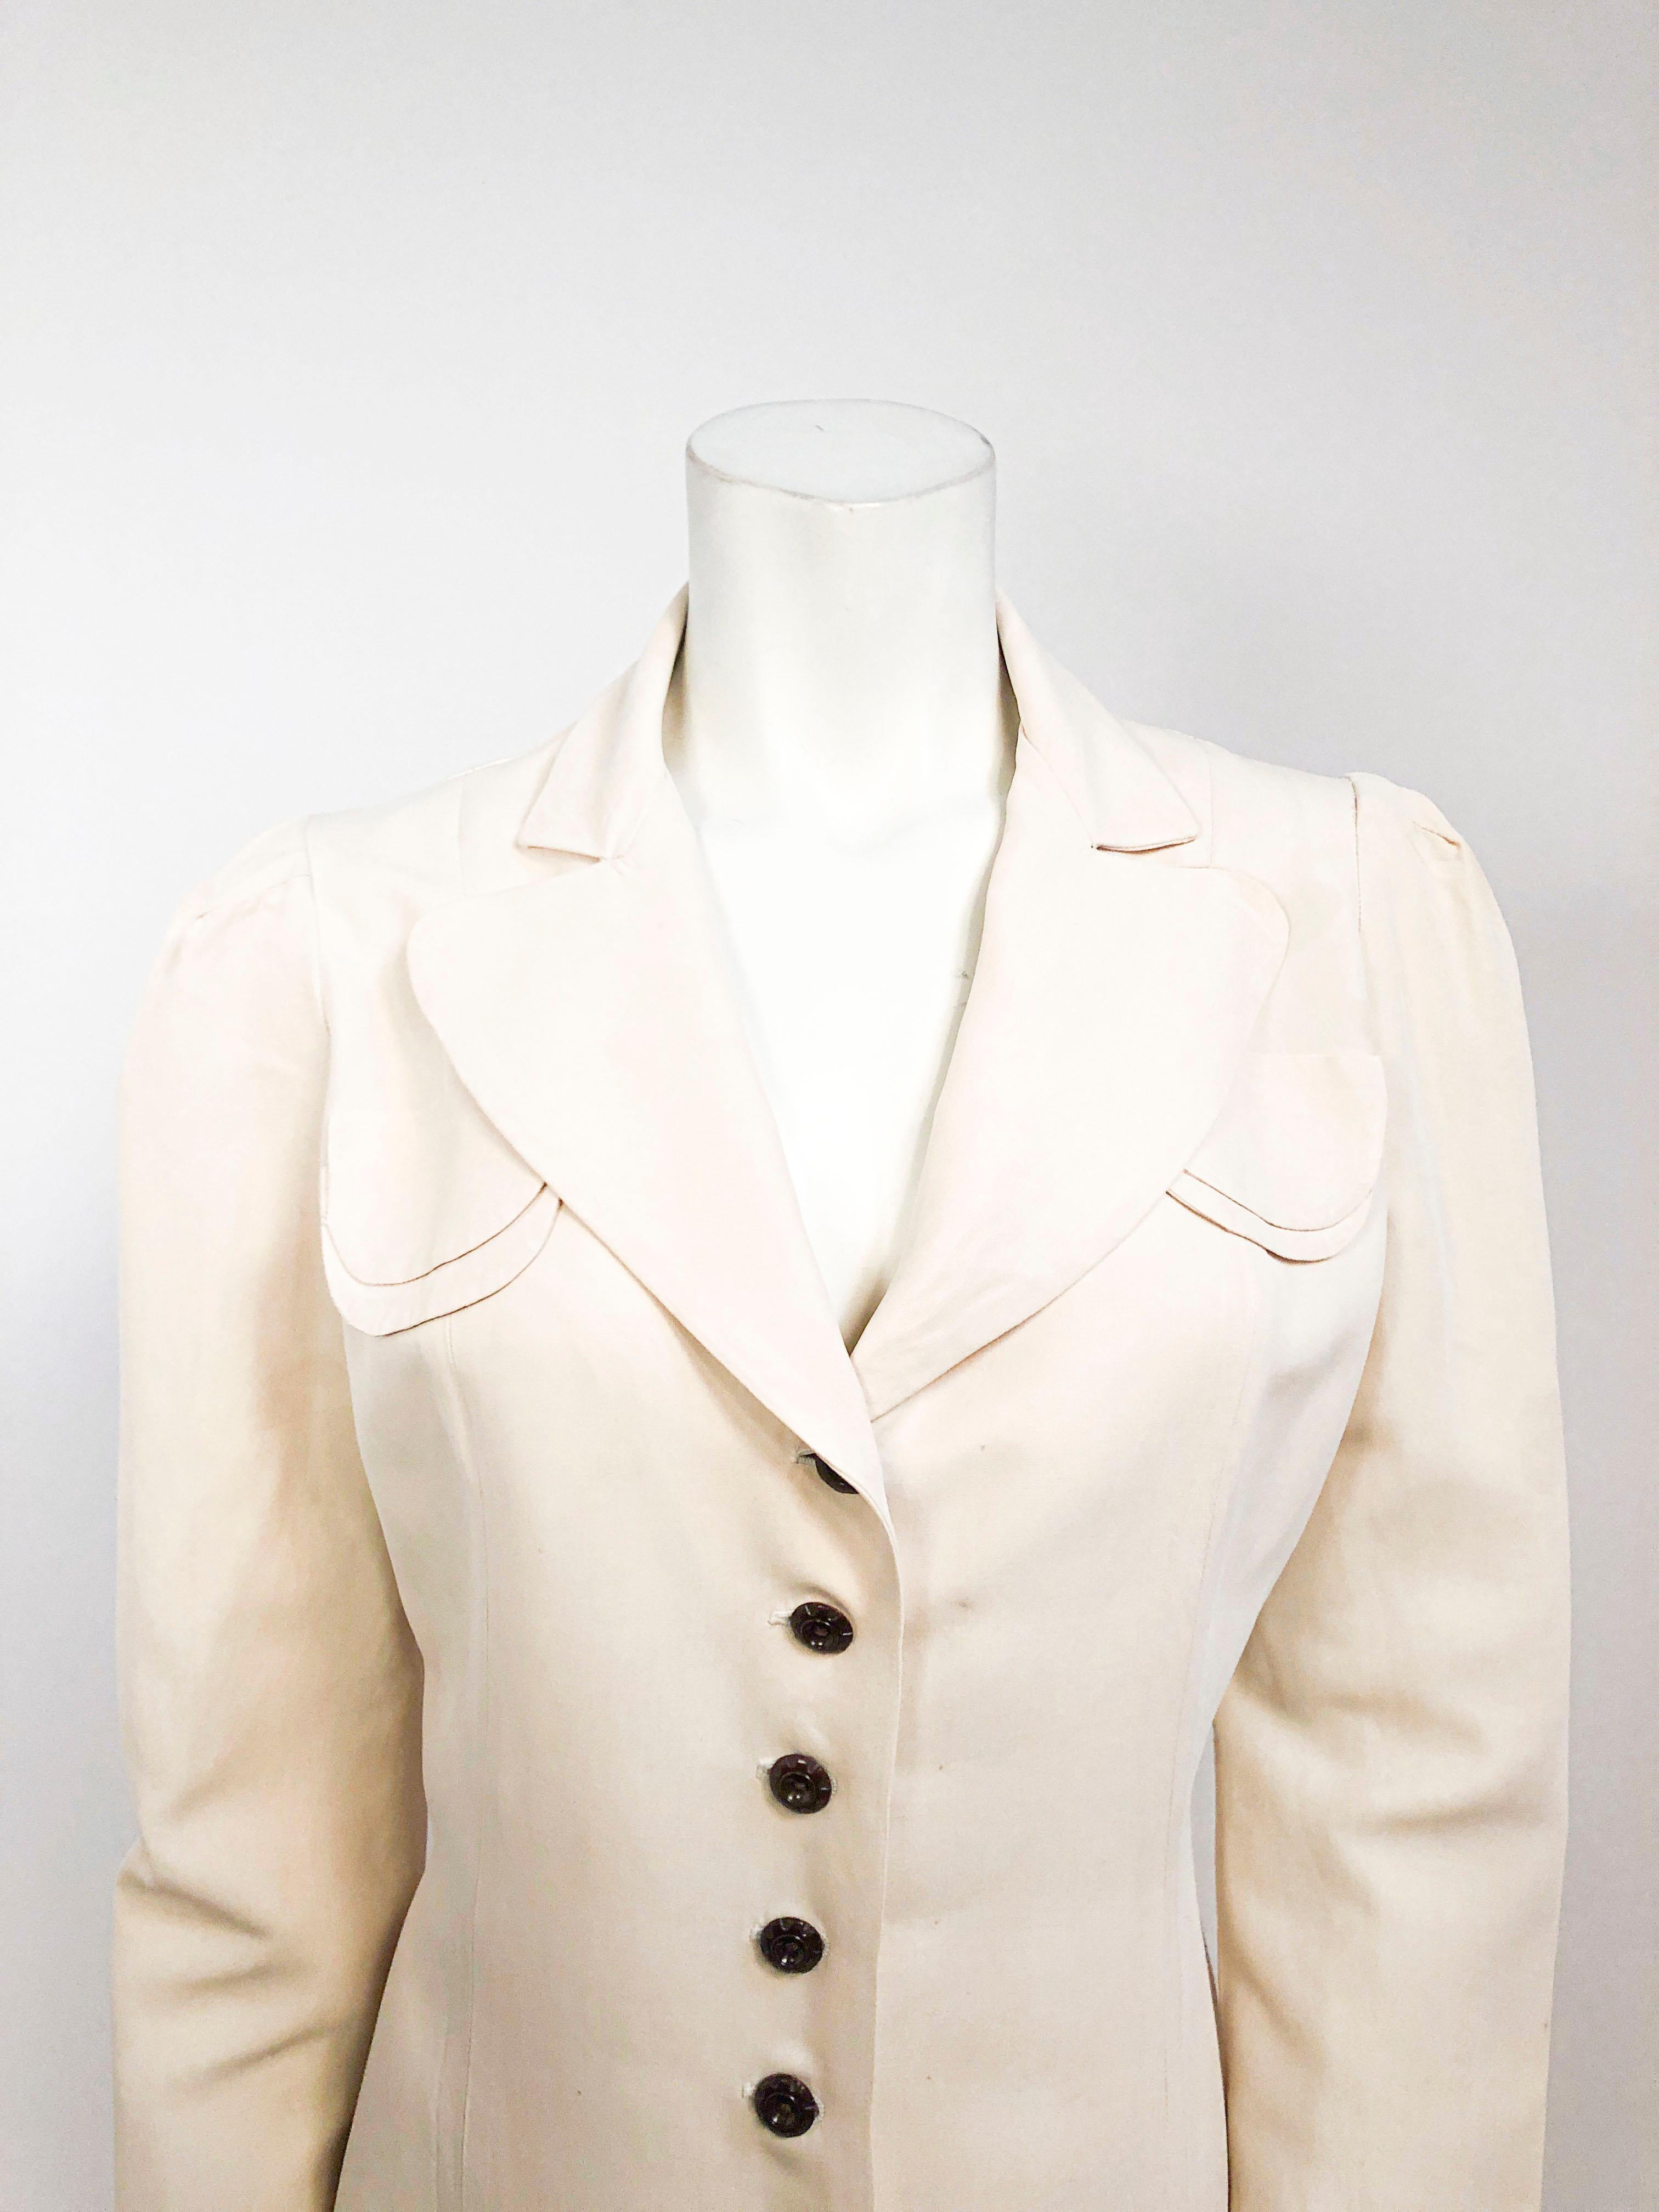 1940s coat in beige with a very light hue of pink. The textile is a fine rayon twill that is light-weight. This piece is decorated with faux pockets, enlarged collar,  and original brown buttons.The sleeves are gathered at the shoulder and darted at